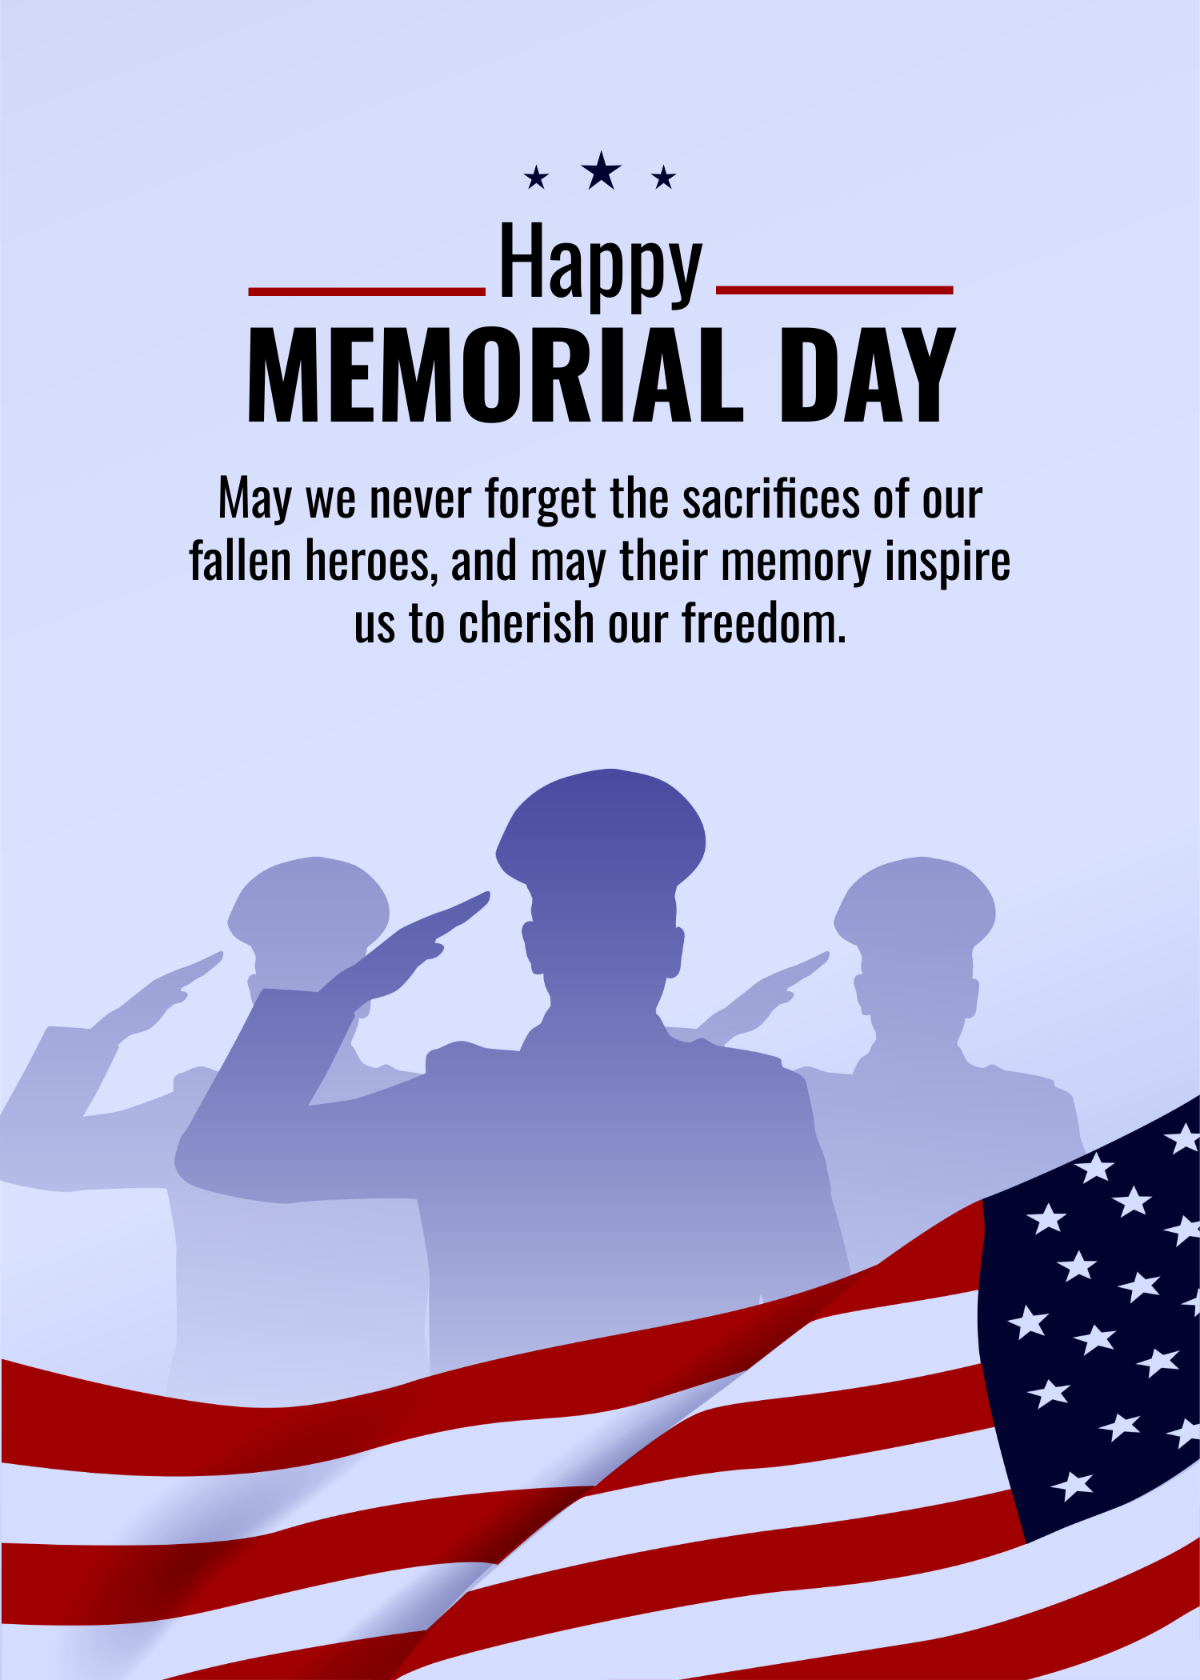 Happy Memorial Day Wishes Template